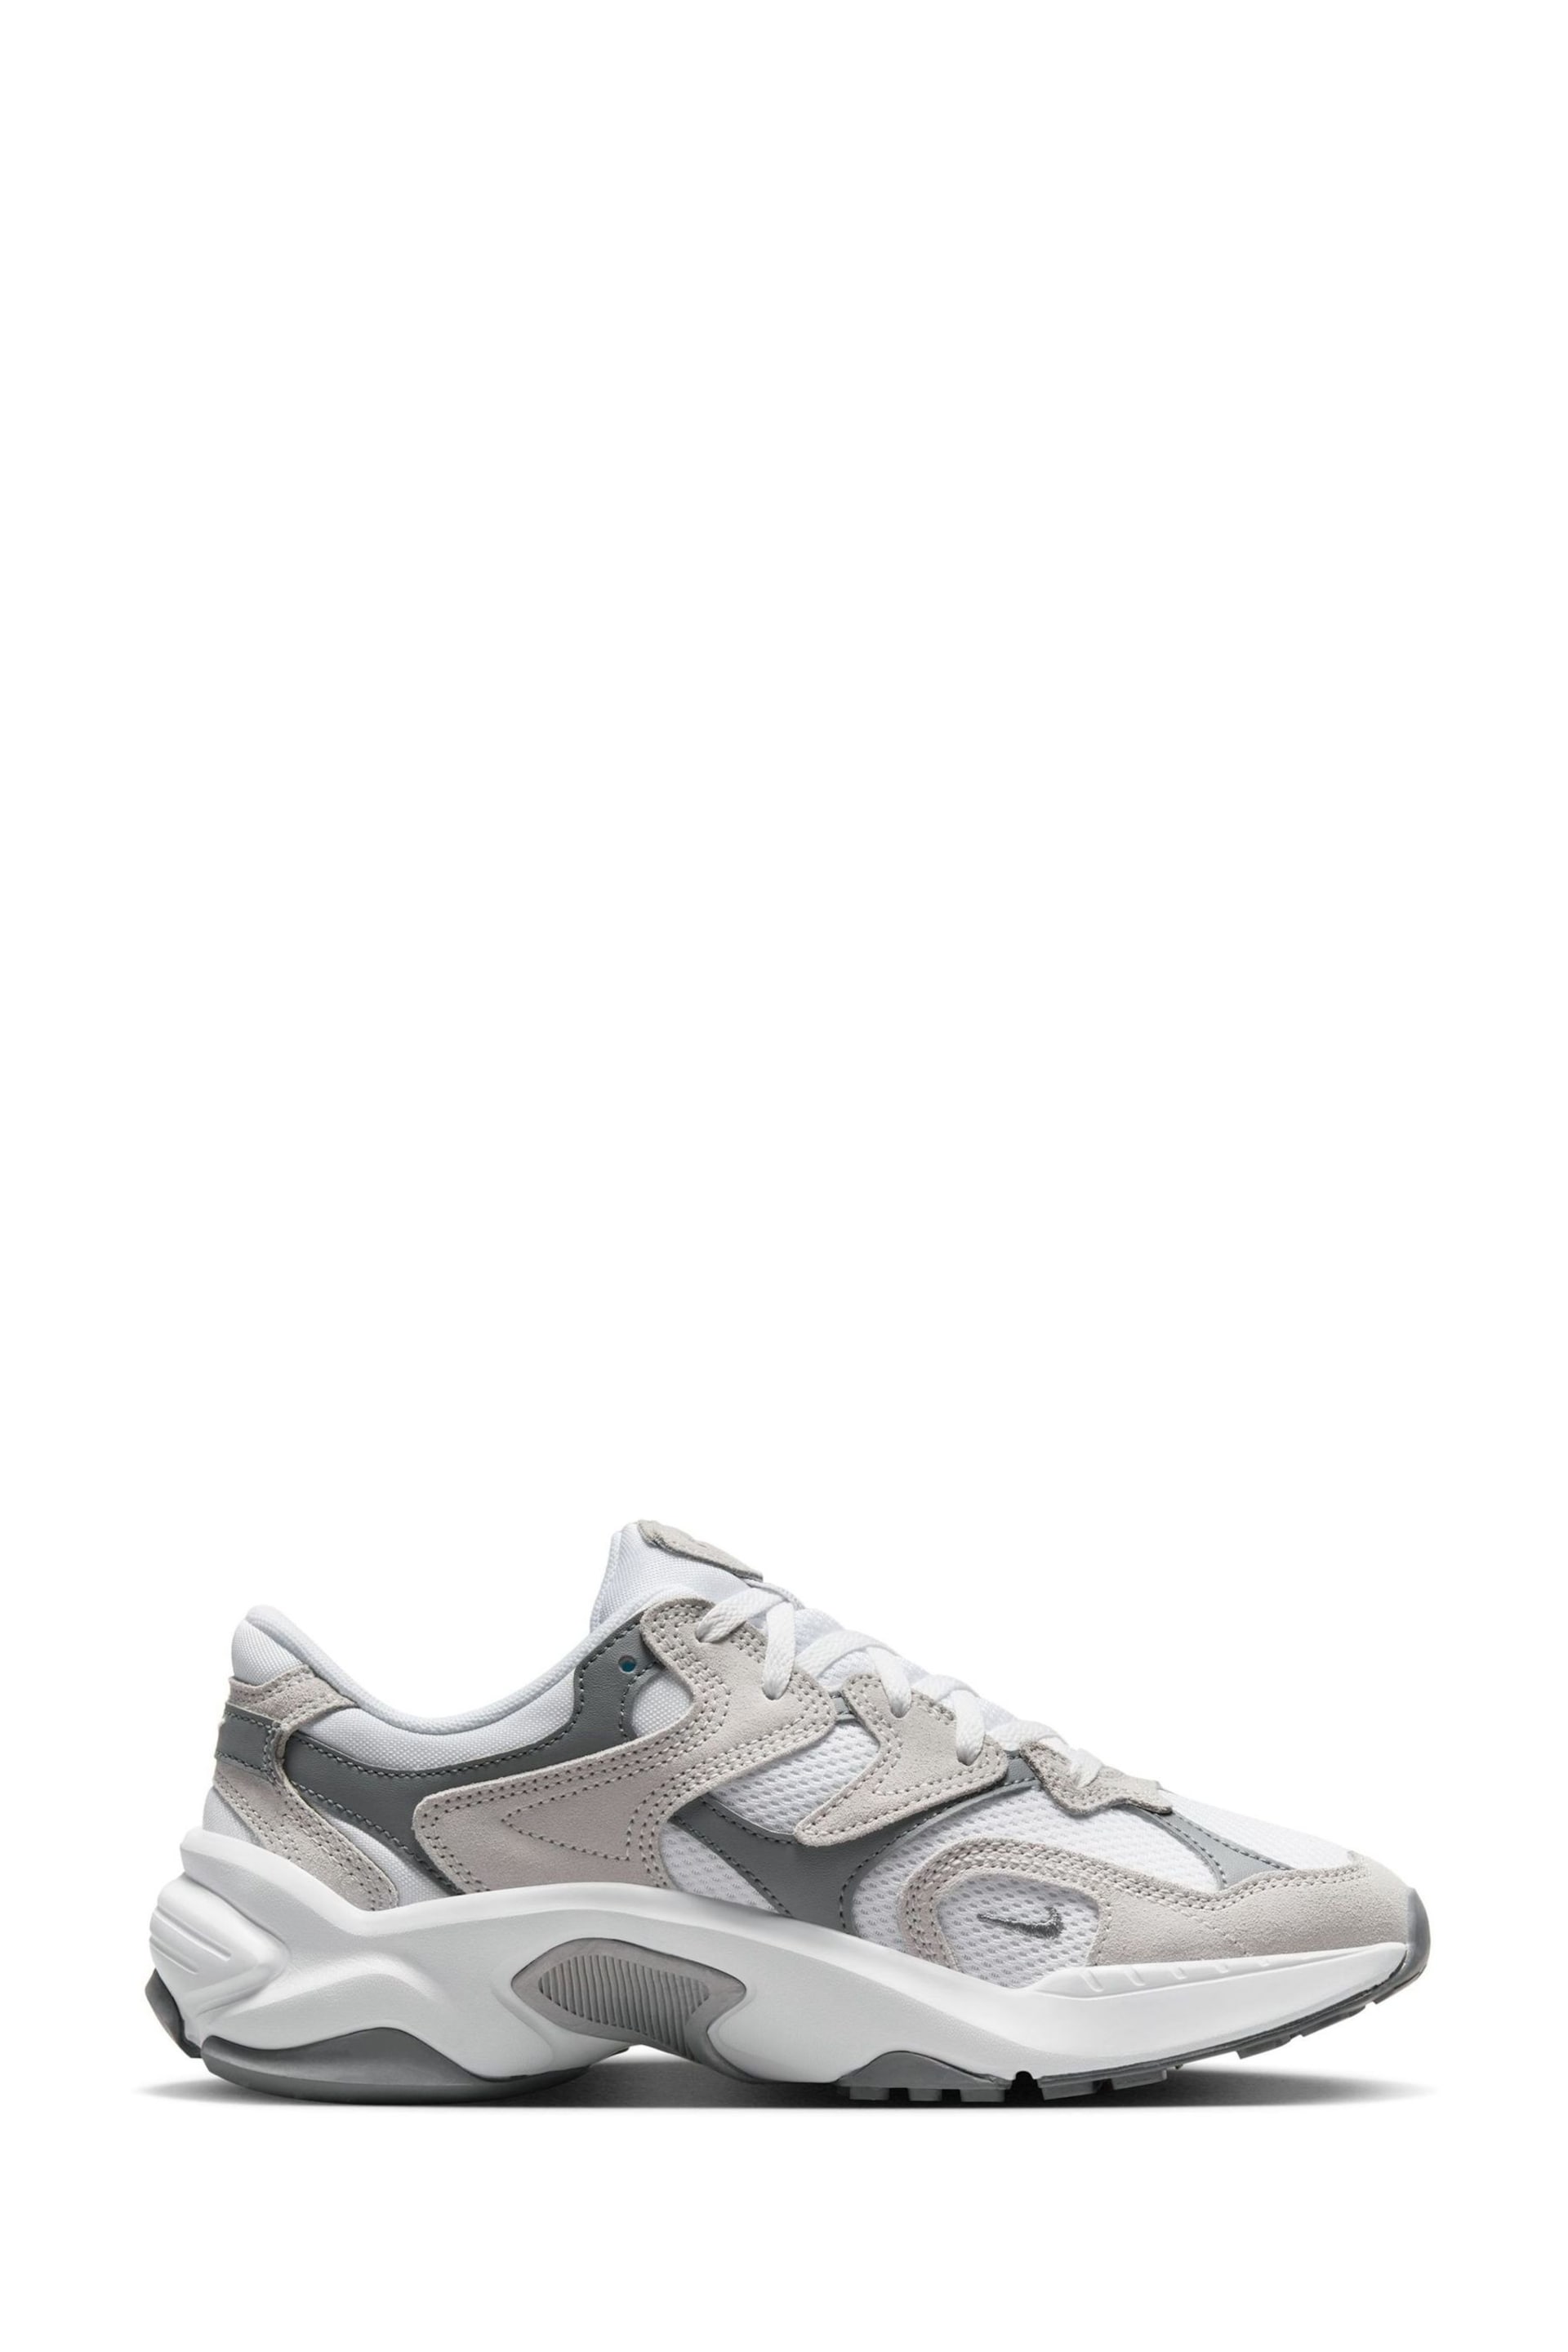 Nike Grey/White AL8 Running Trainers - Image 5 of 13